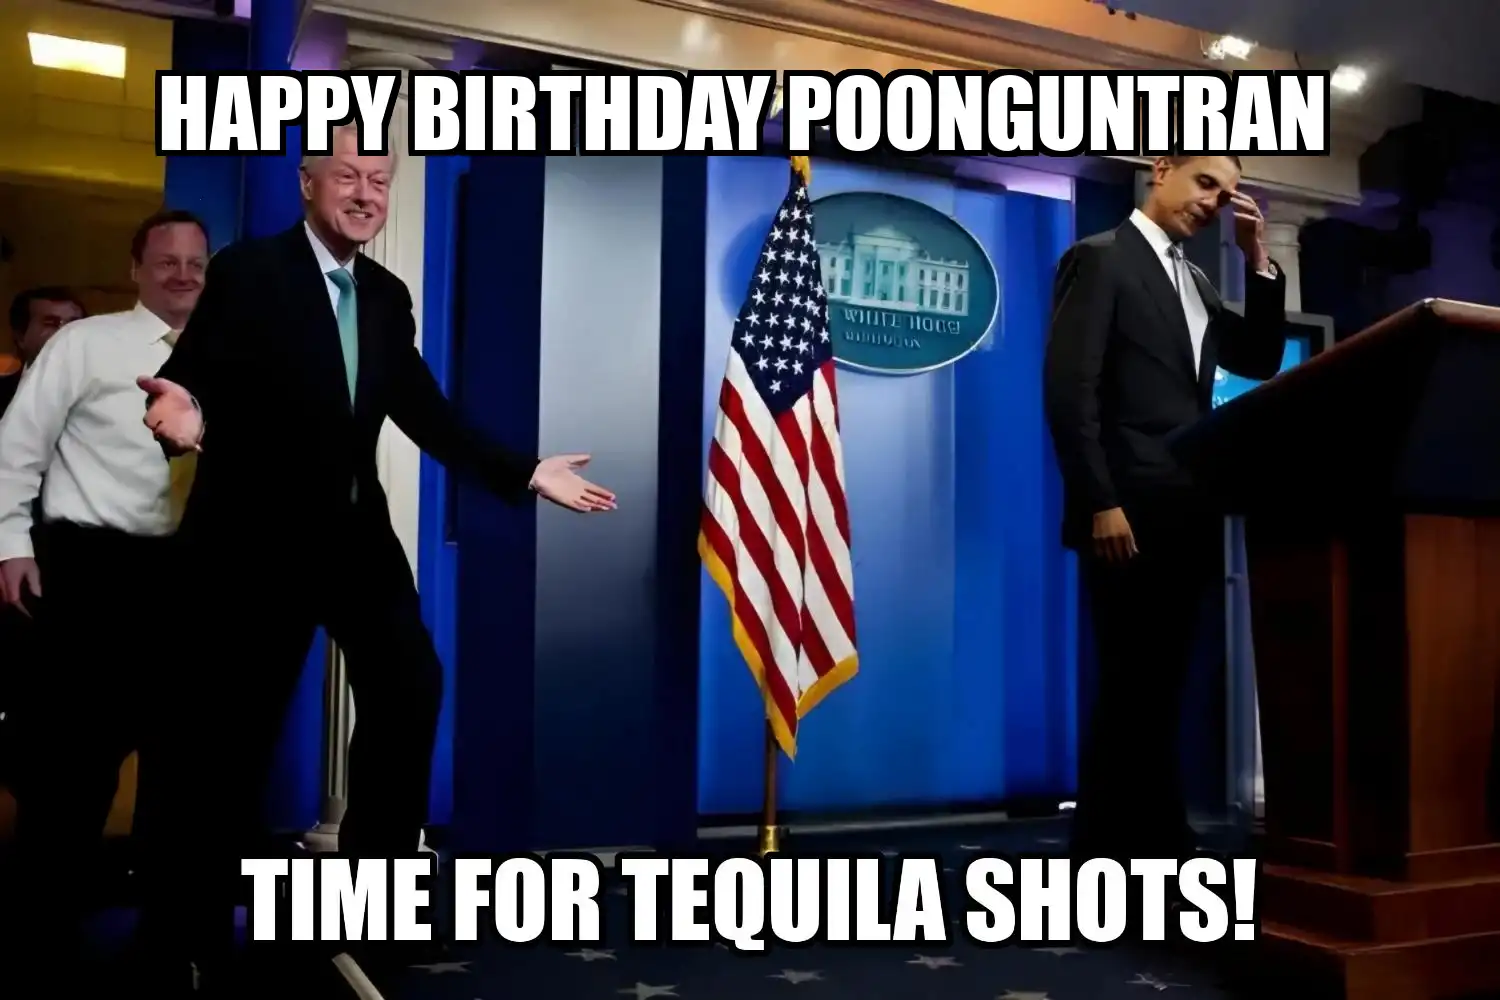 Happy Birthday Poonguntran Time For Tequila Shots Memes